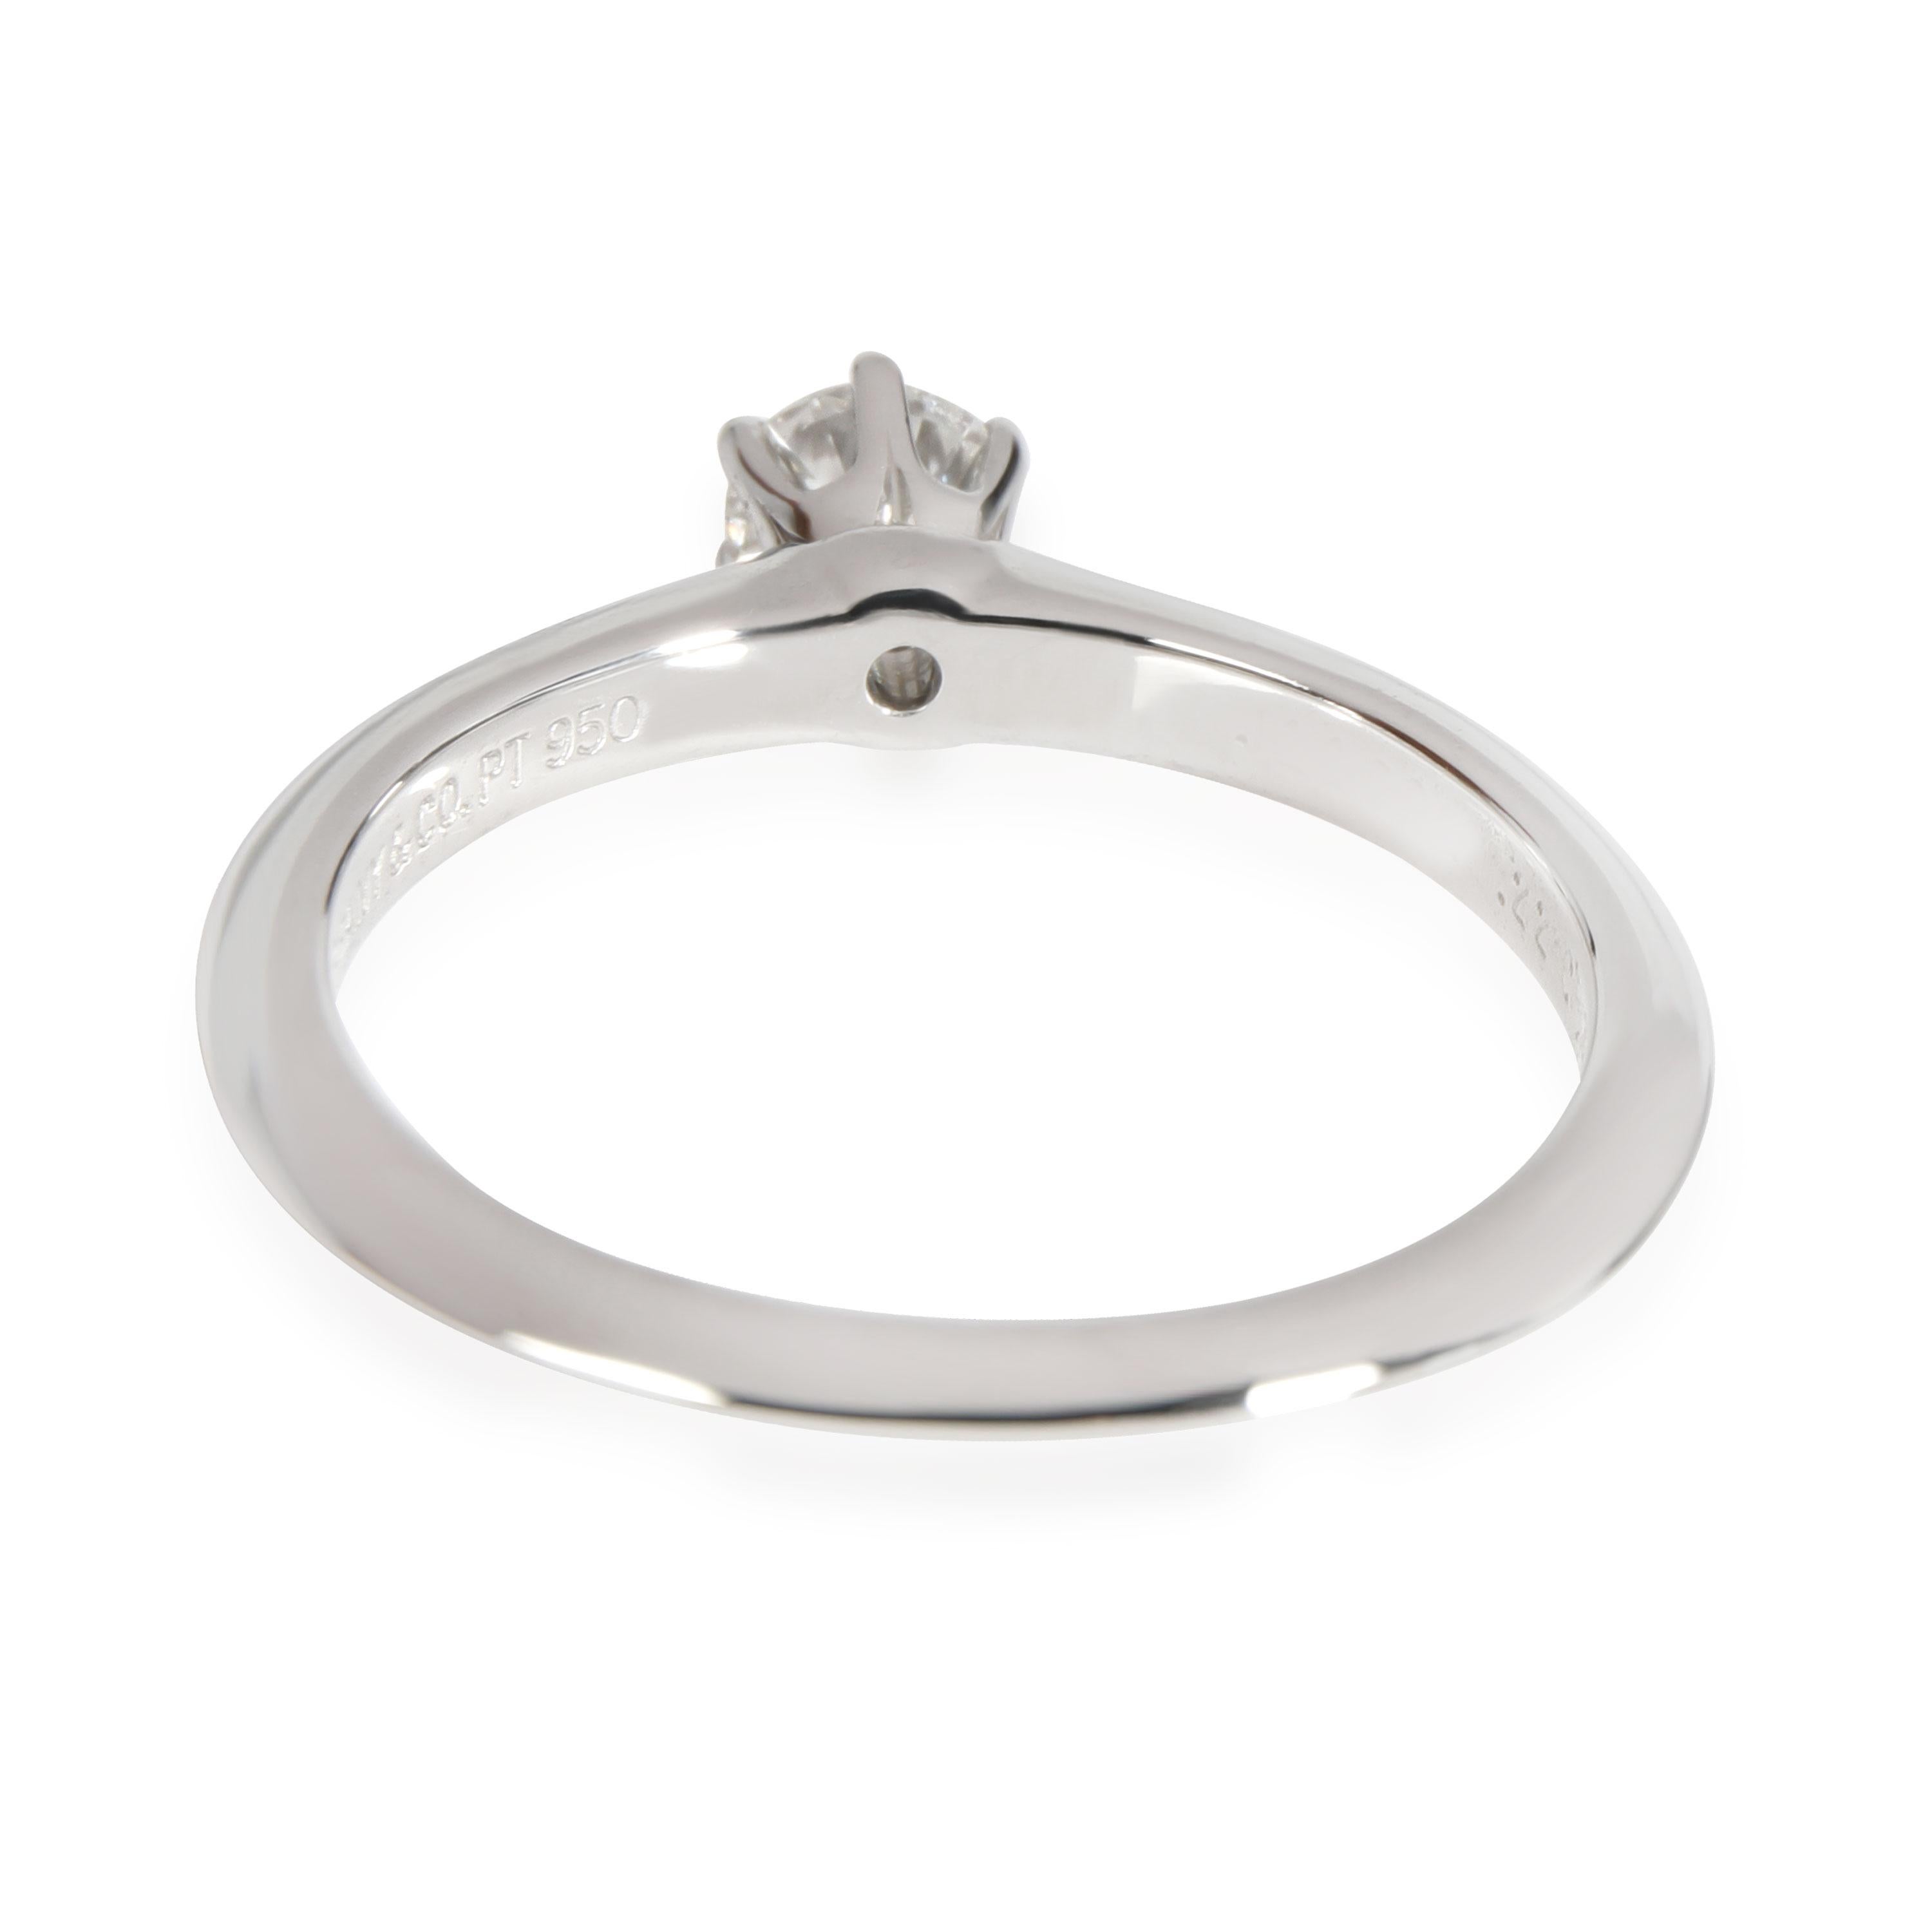 Tiffany & Co. Diamond Engagement Ring in Platinum H VS1 0.22 CTW

PRIMARY DETAILS
SKU: 112083
Listing Title: Tiffany & Co. Diamond Engagement Ring in Platinum H VS1 0.22 CTW
Condition Description: Retails for 1860 USD. In excellent condition and